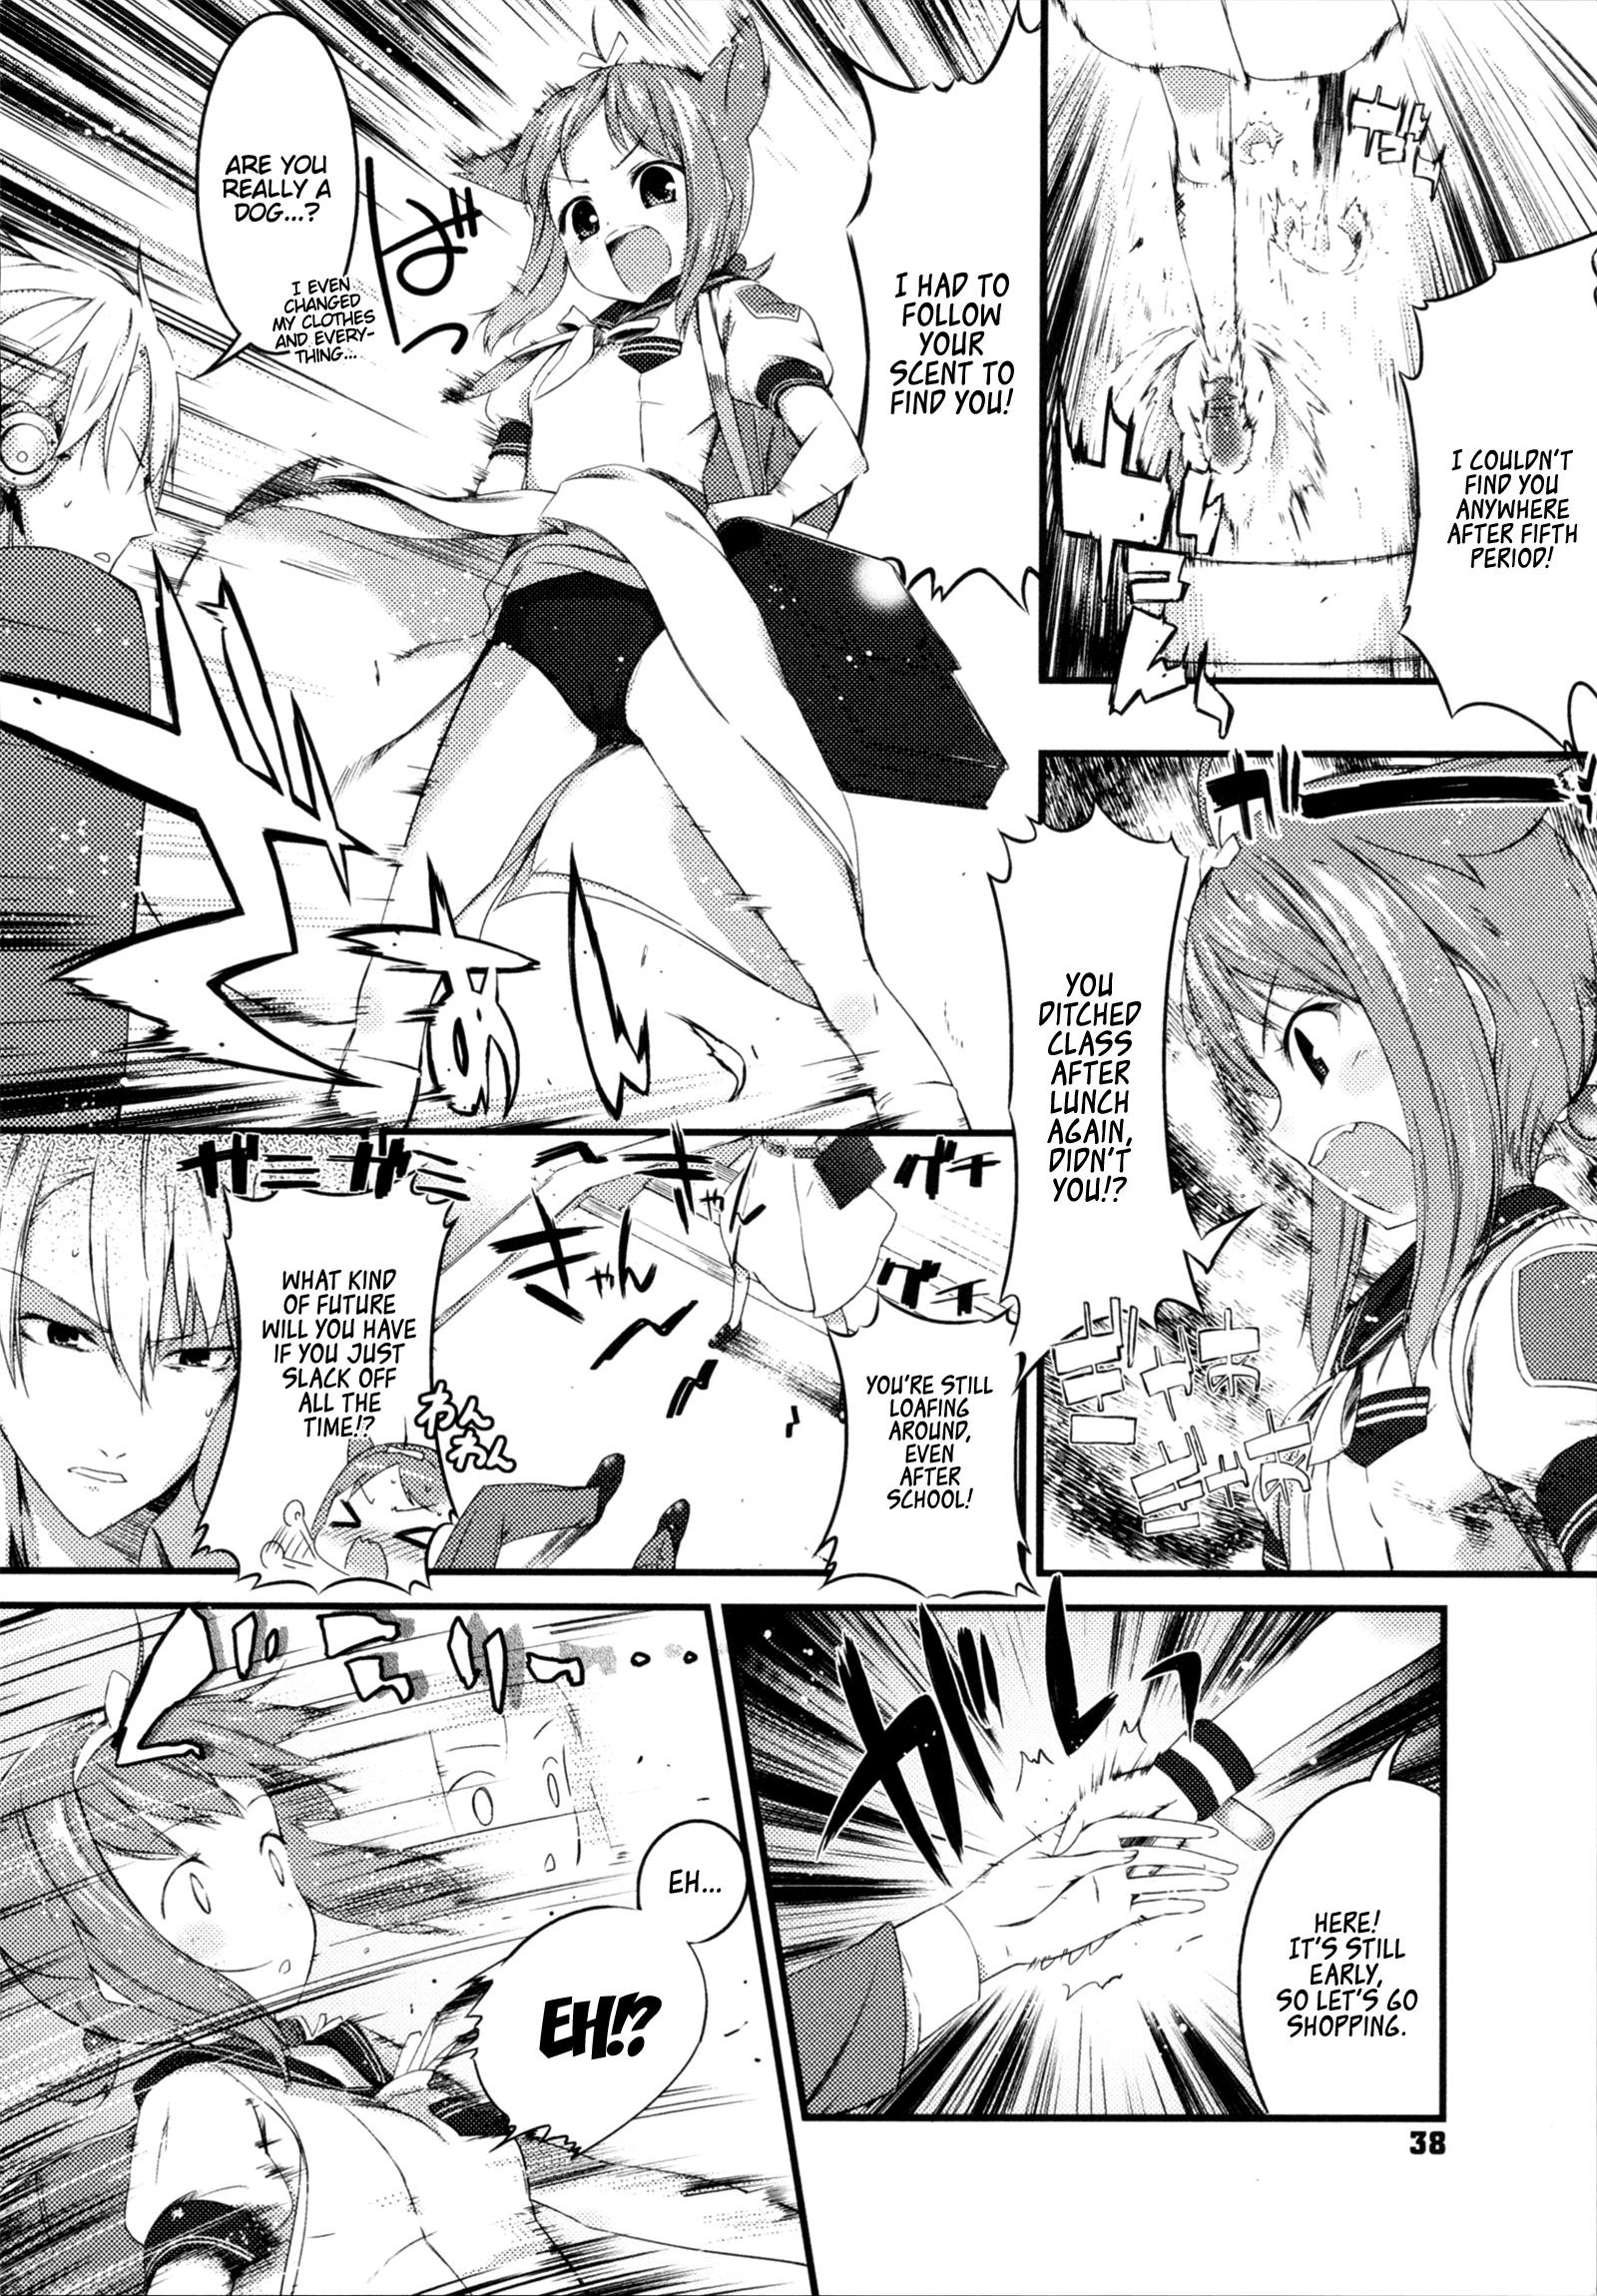 Tgirls Kyou no Wanko | Today's Doggy Exposed - Page 6